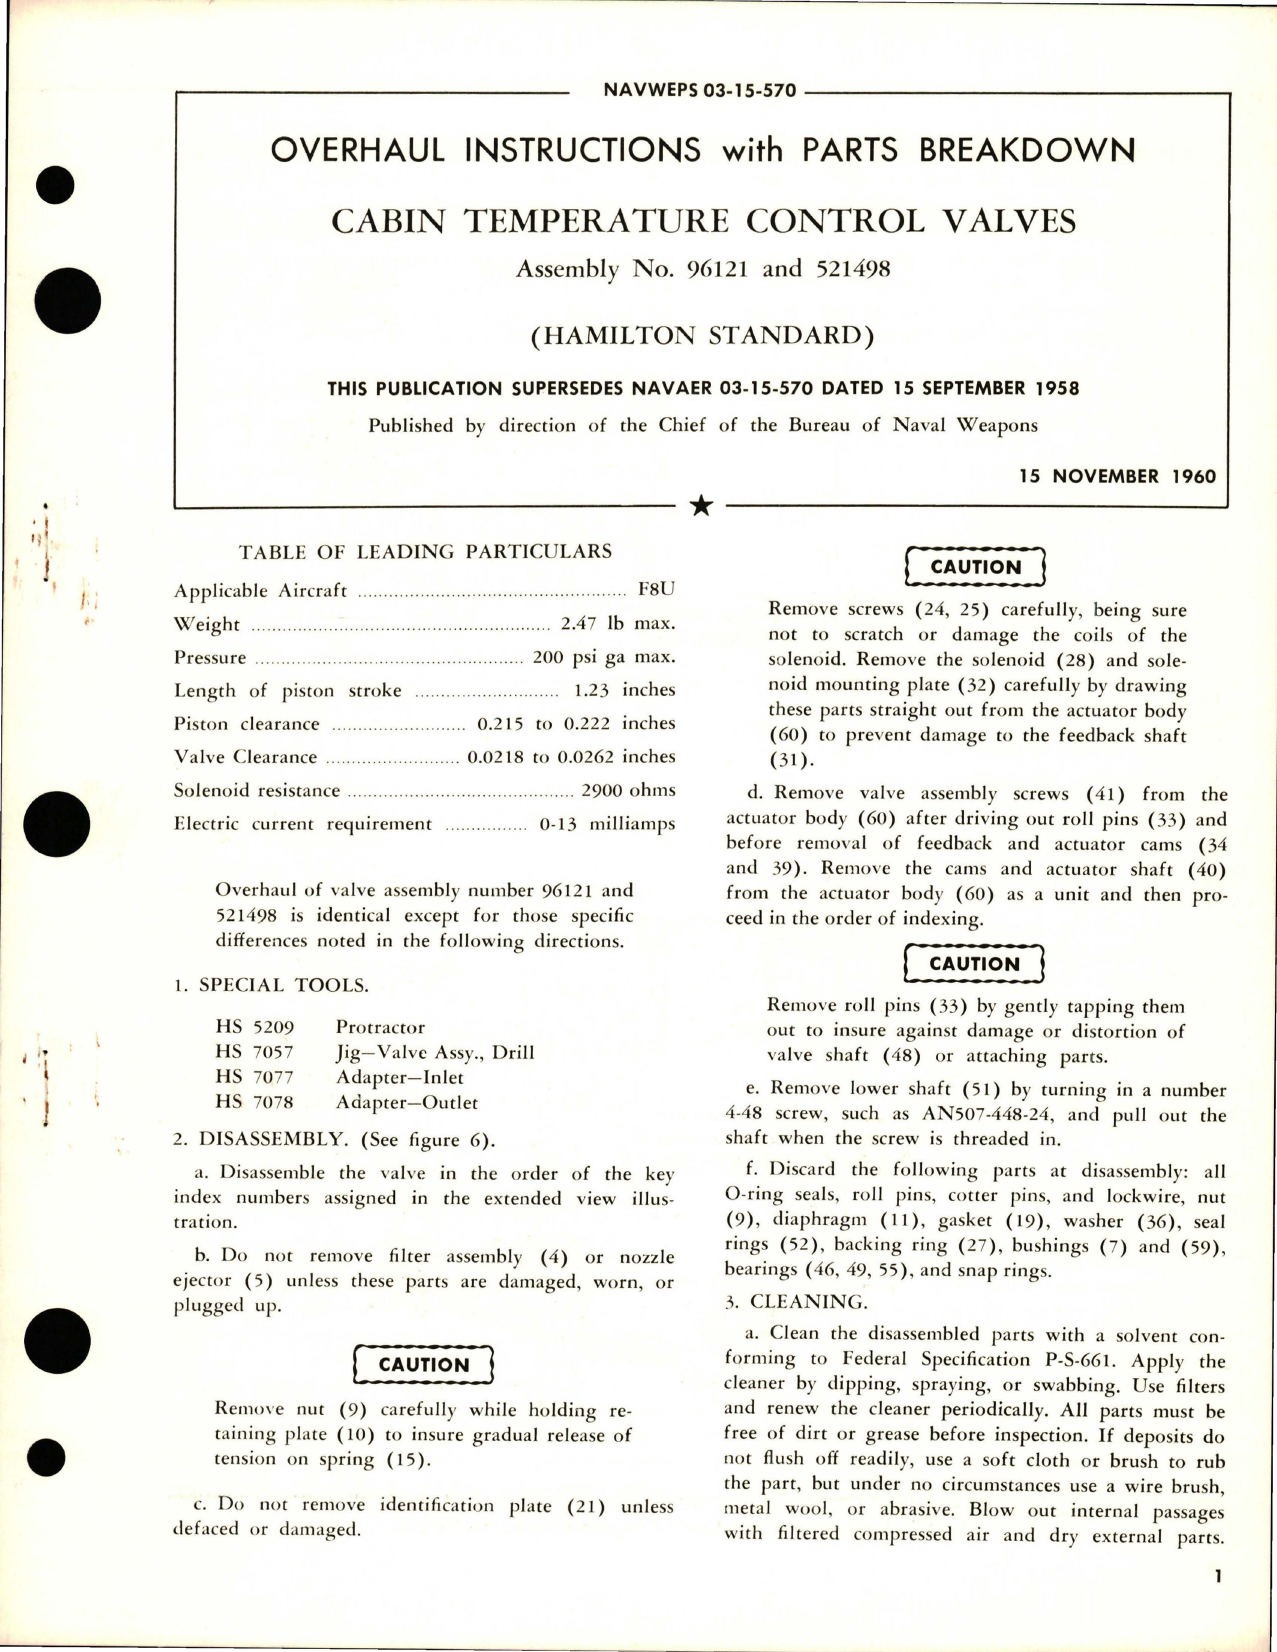 Sample page 1 from AirCorps Library document: Overhaul Instructions with Parts for Cabin Temperature Control Valves - Assembly No. 96121 and 521498